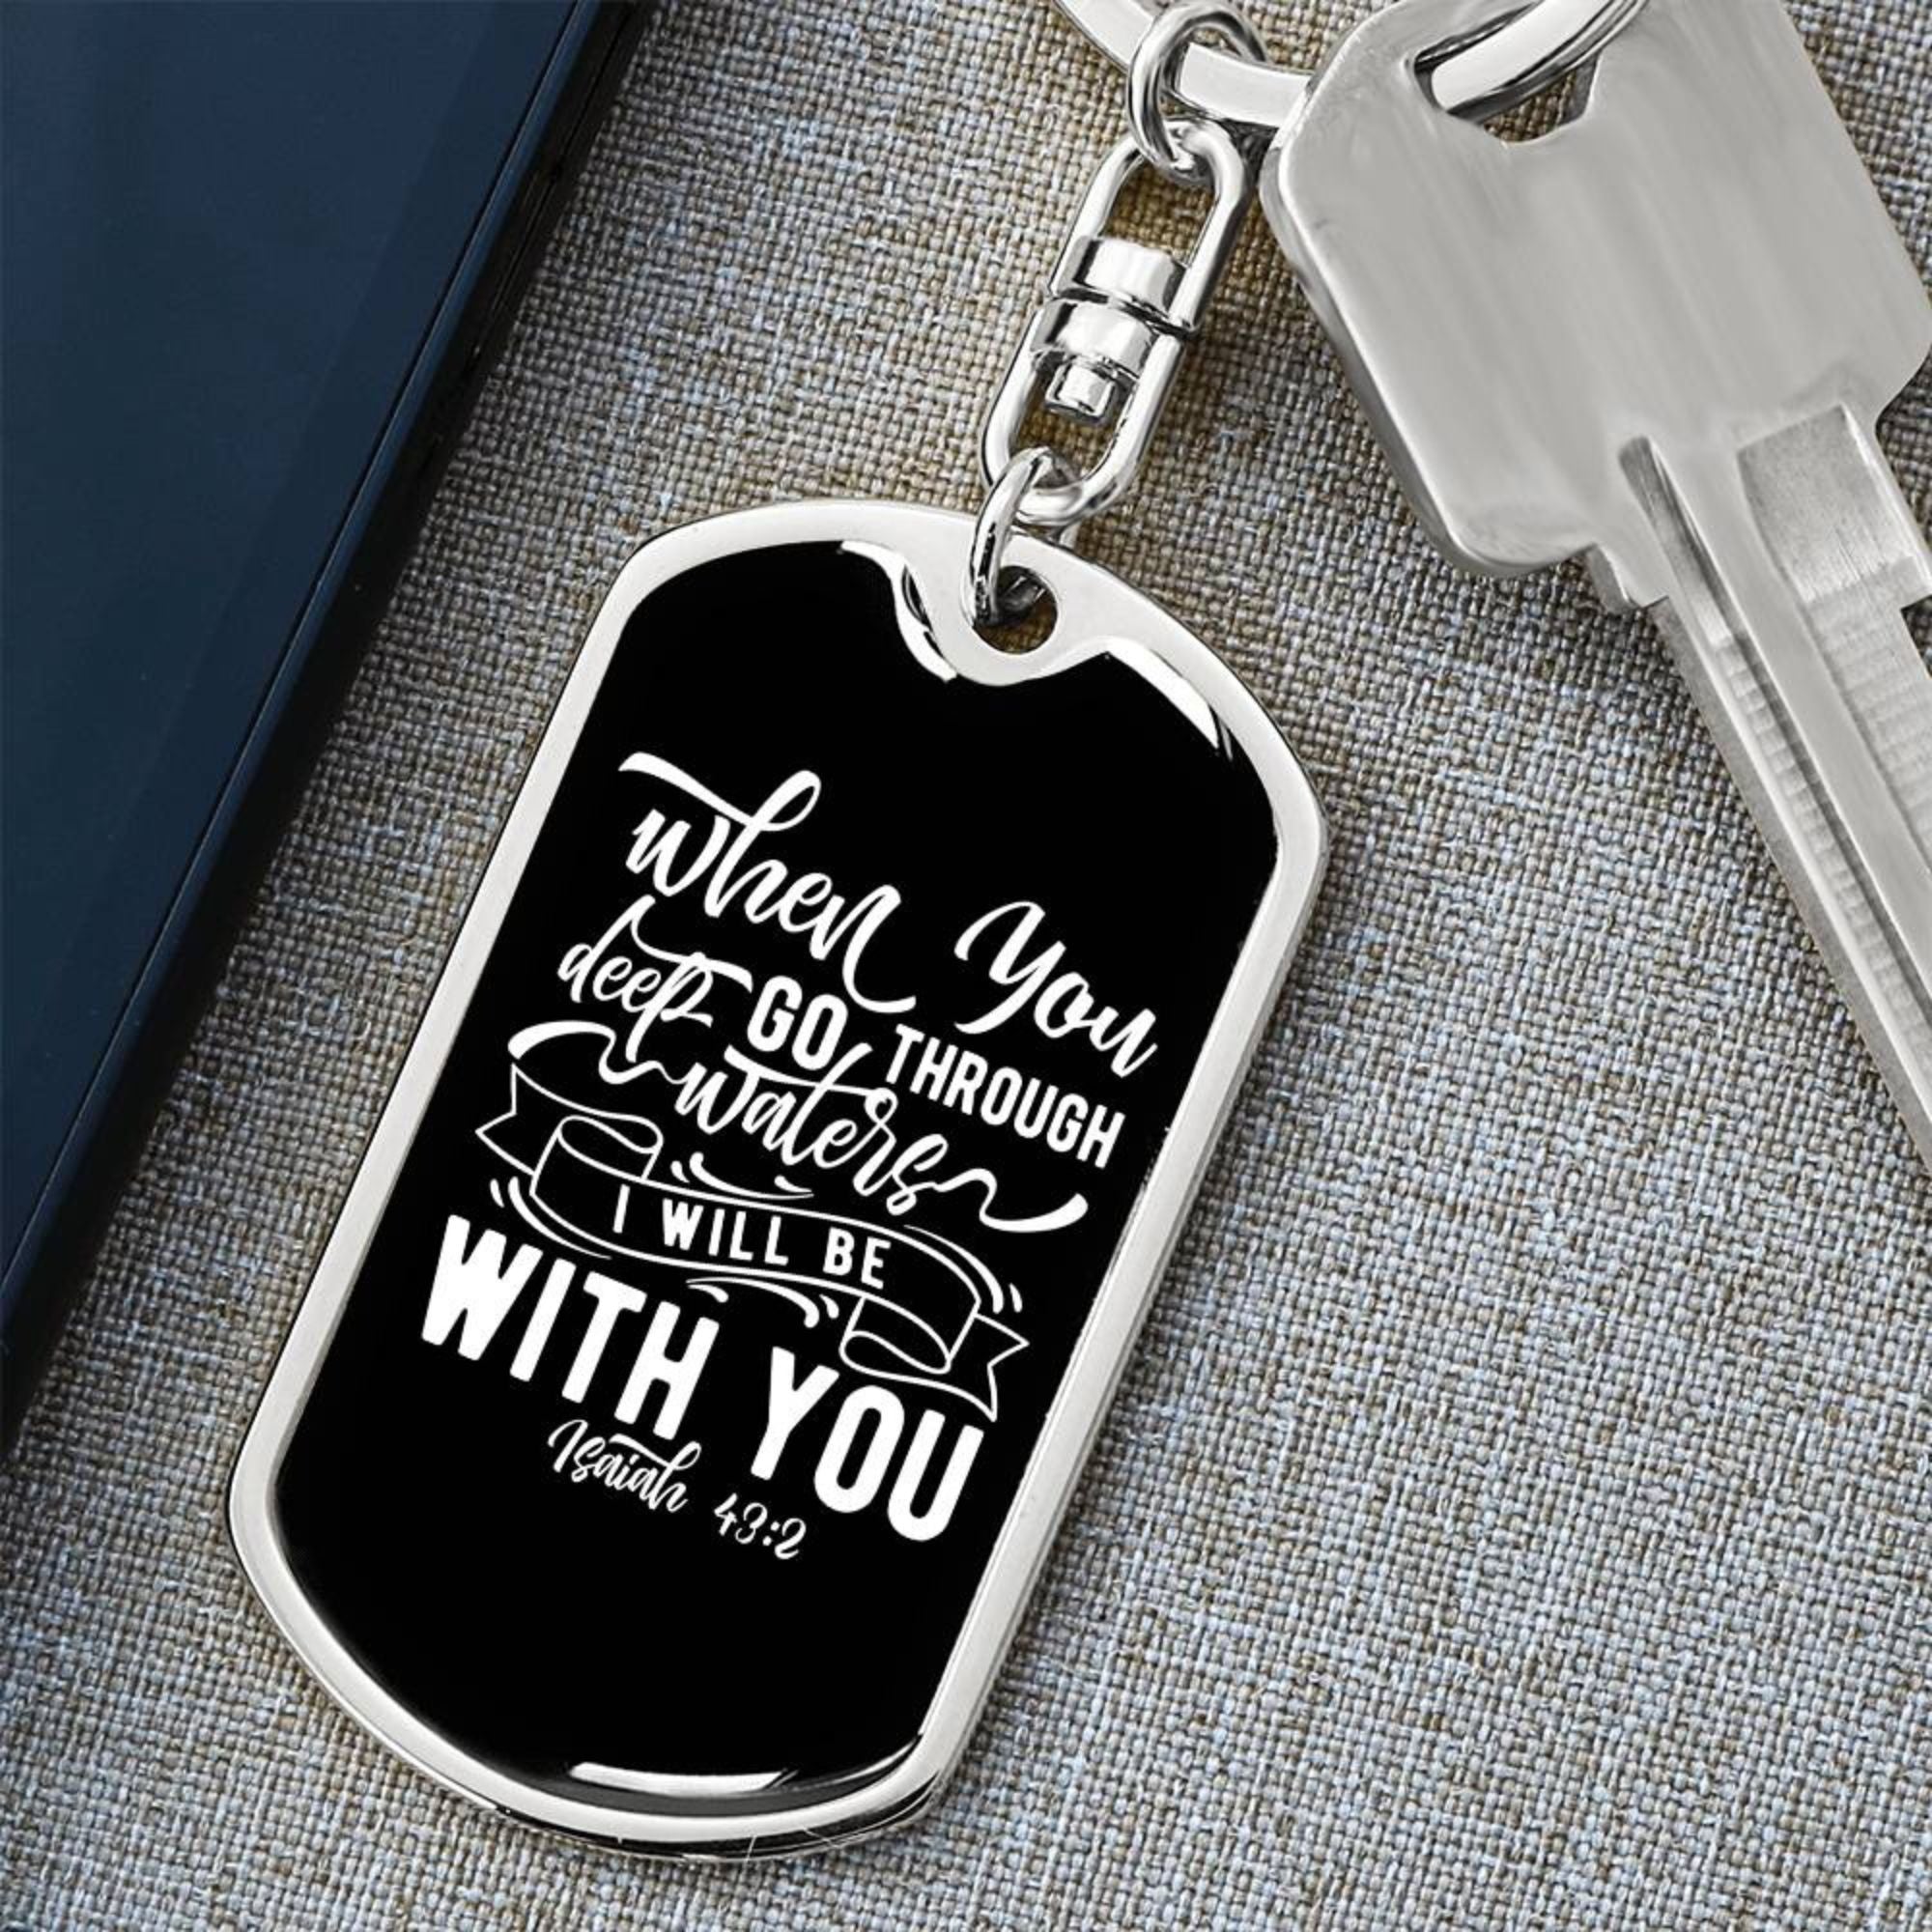 I Will Be With You - White Dog Tag with Swivel Keychain Engraving: No Jesus Passion Apparel